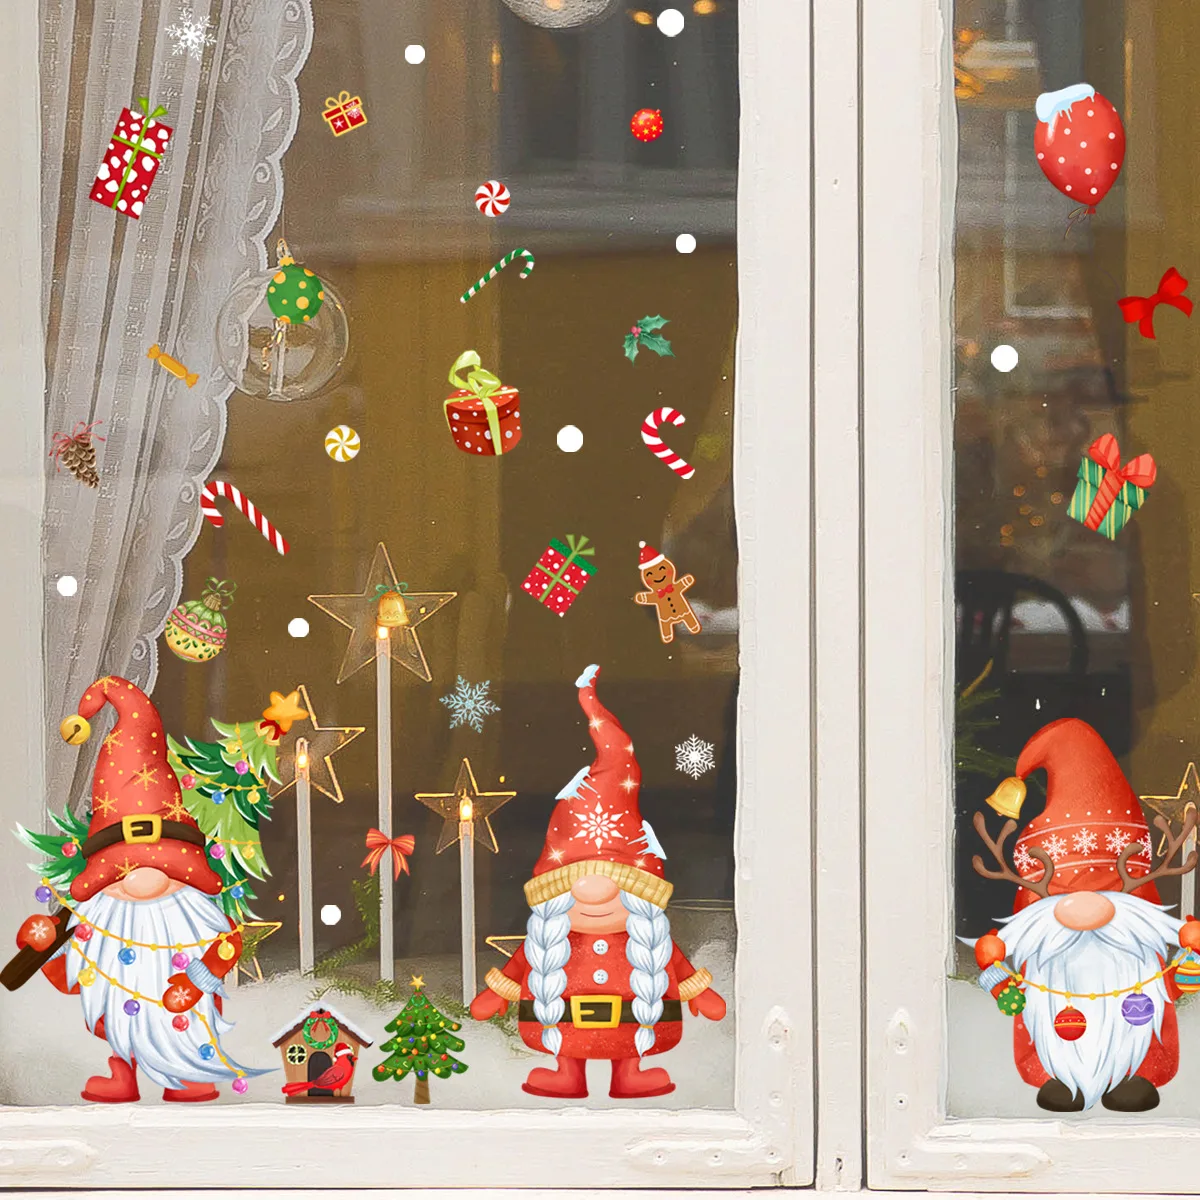 3pcs Cartoon Santa Christmas Static Stickers Wall Stickers Double-sided Visual Glass Window Wall Stickers Wallpapers Dj4035 magic window glass cleaning brush double sided sponge wiper scraper bathroom wall shower squeegee mirror scrubber tools